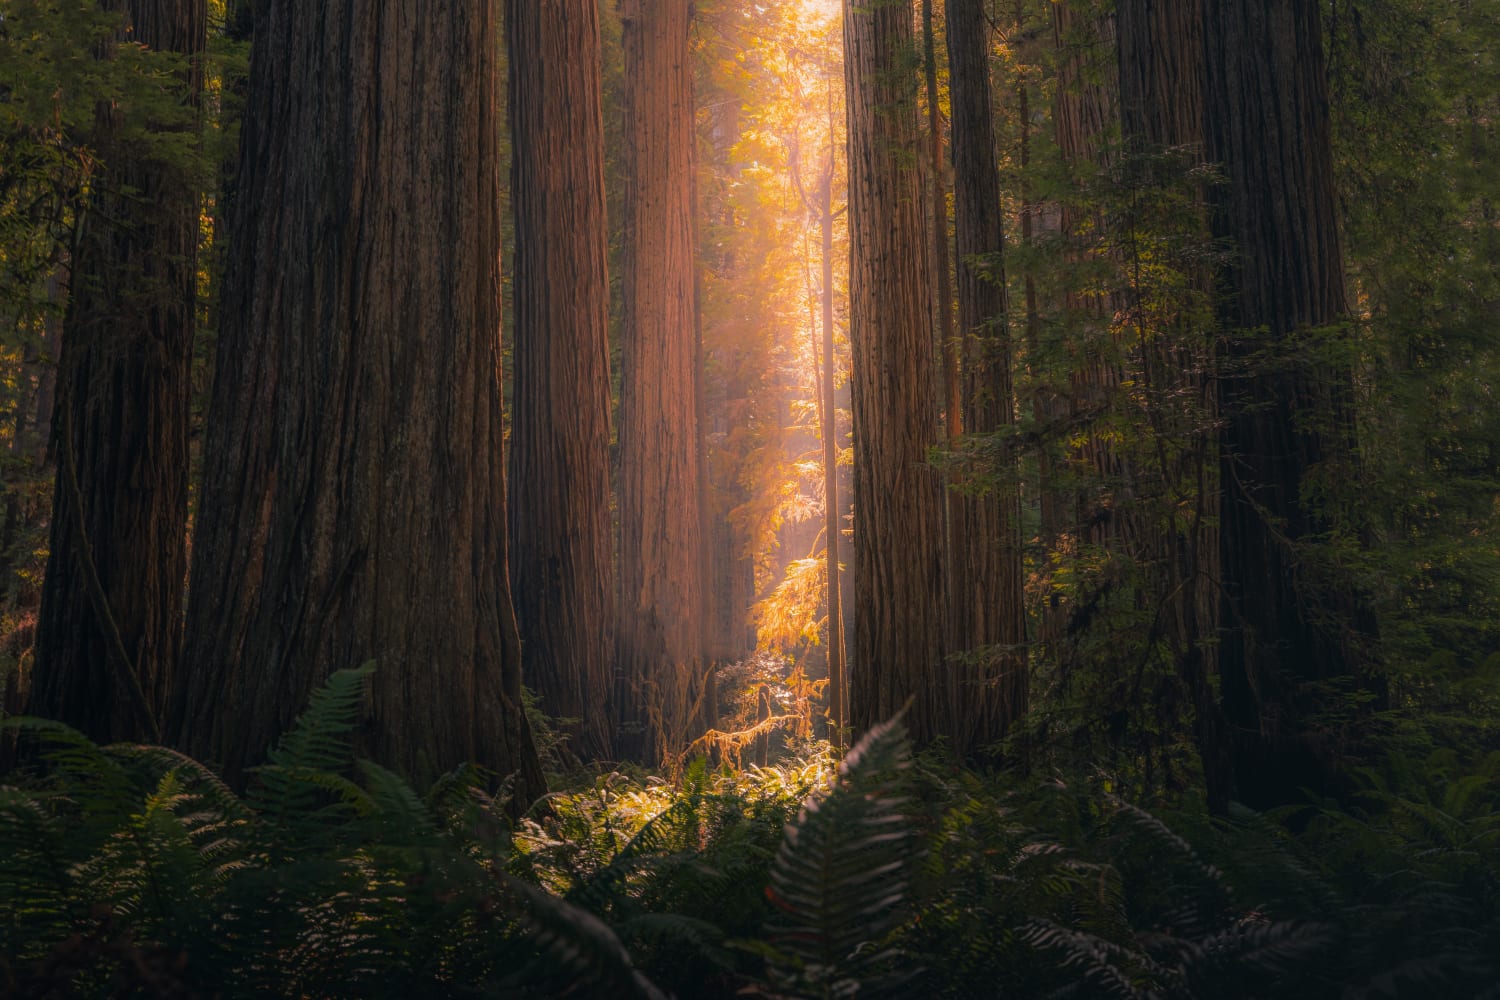 Surreal light at the Jedediah Smith Redwoods.